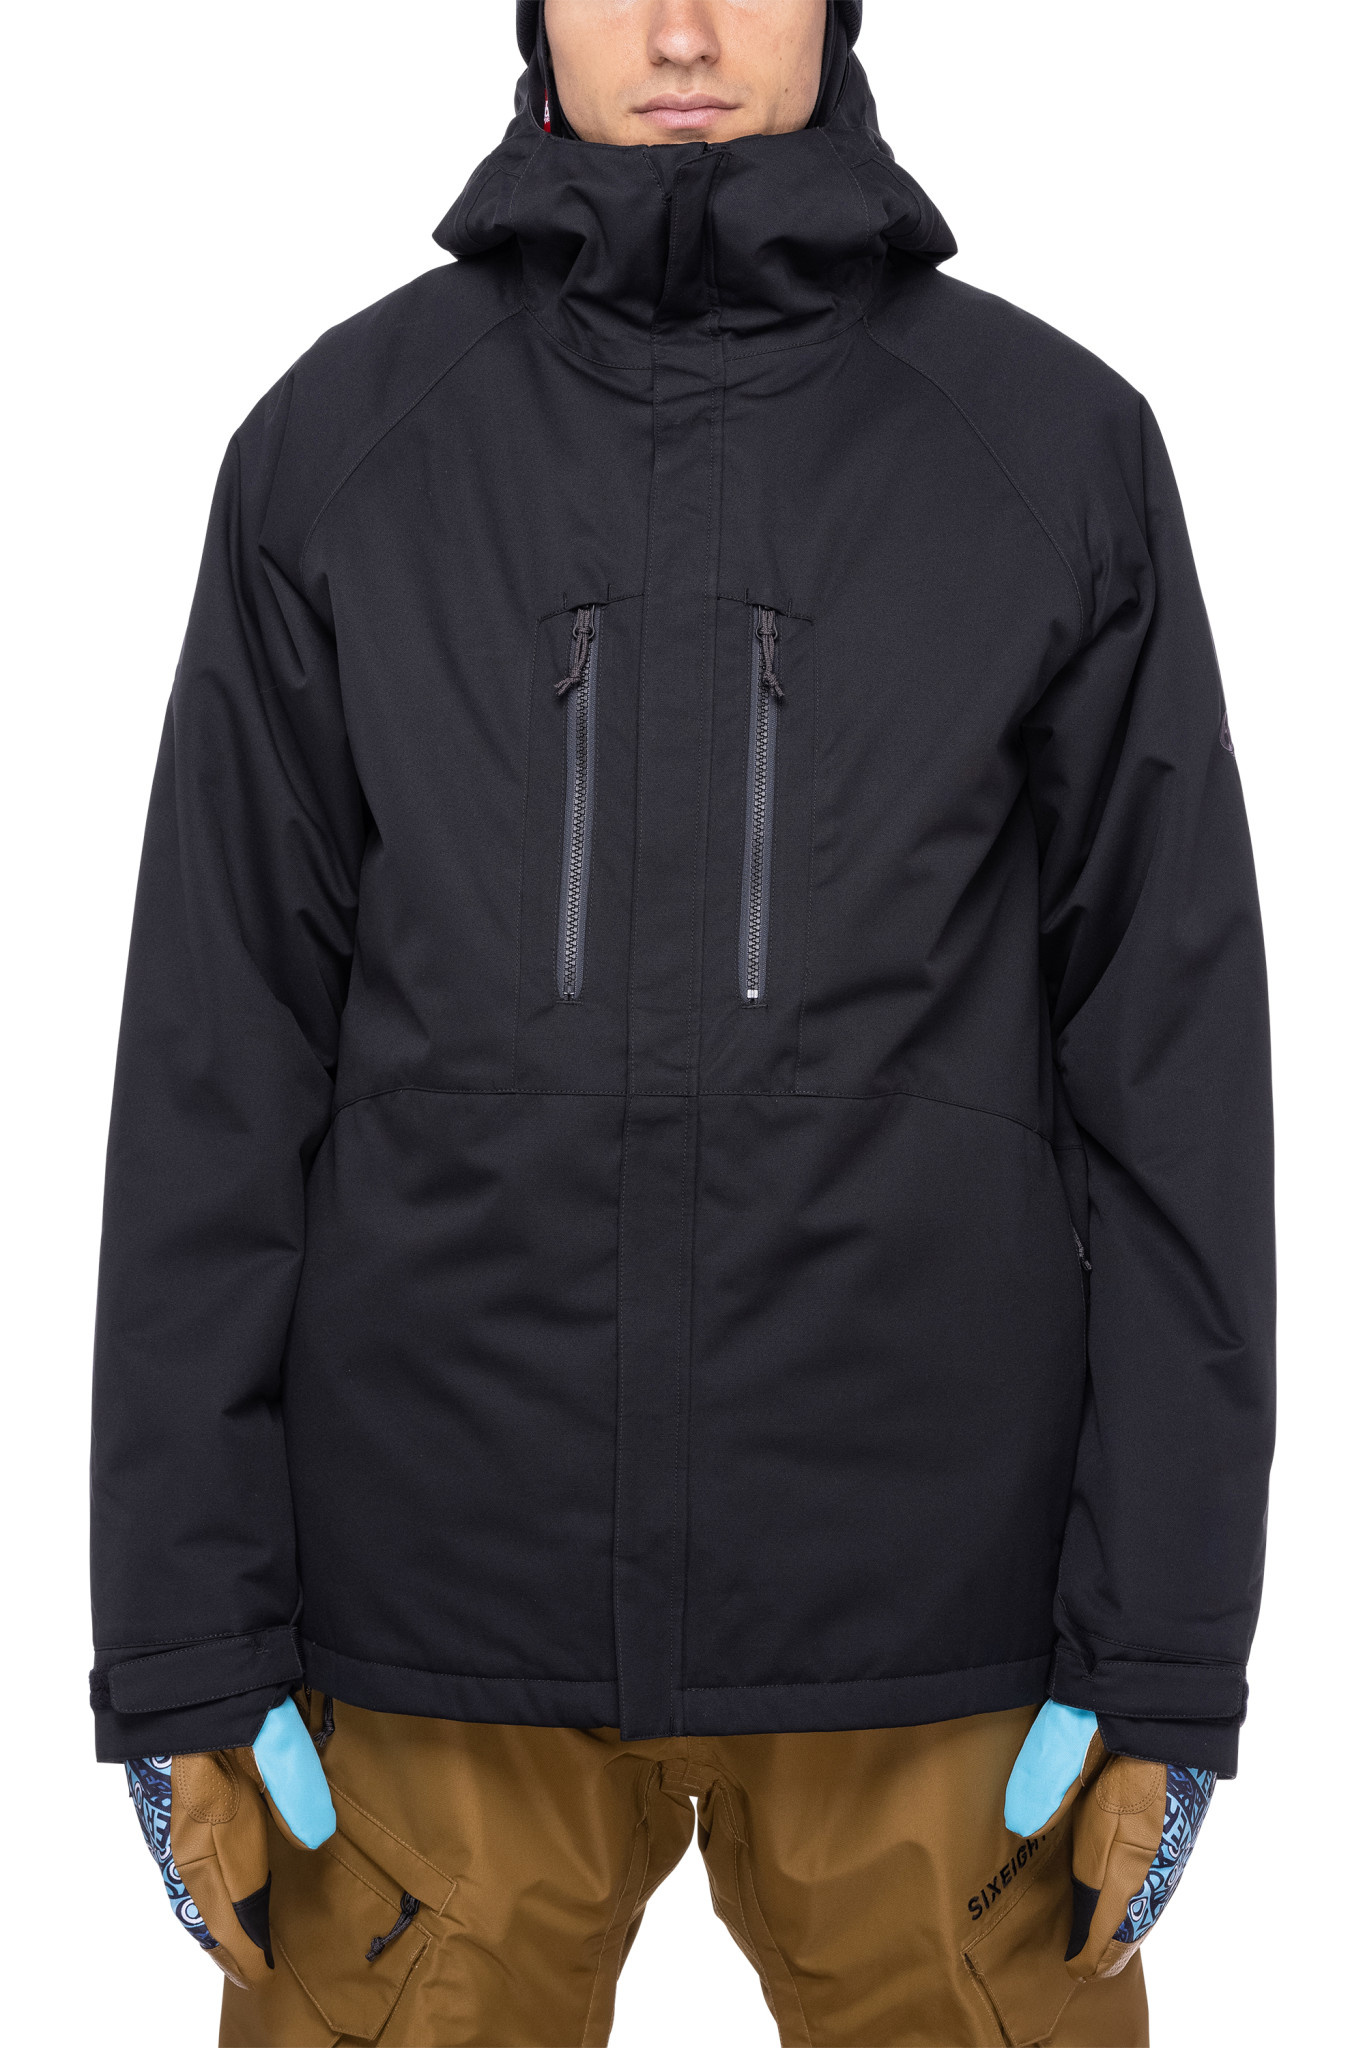 686 686 M's SMARTY 3-In-1 State Jacket